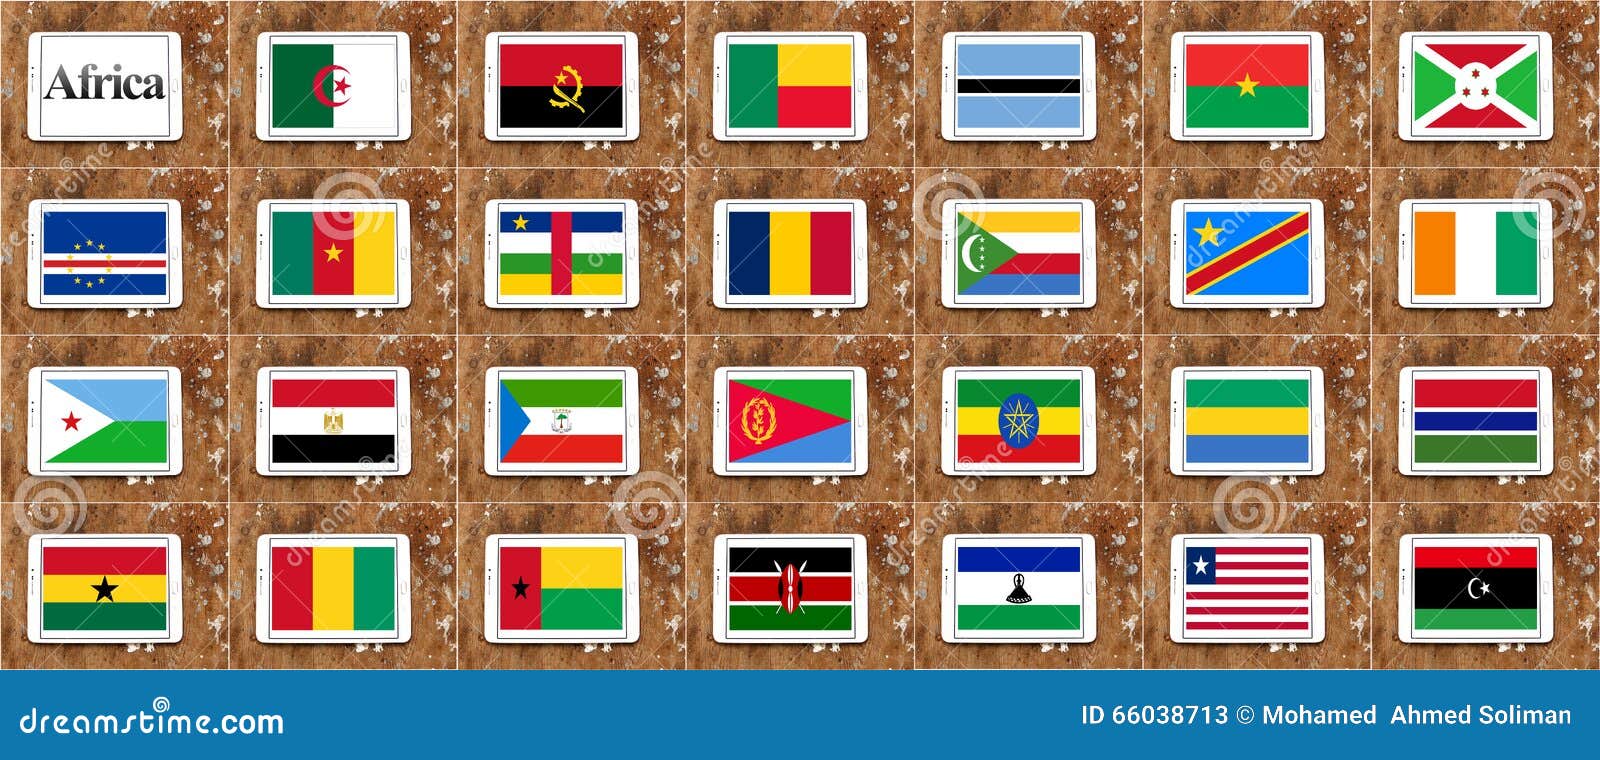 Flags Of Africa Countries In Alphabetical Order Part 1 Stock